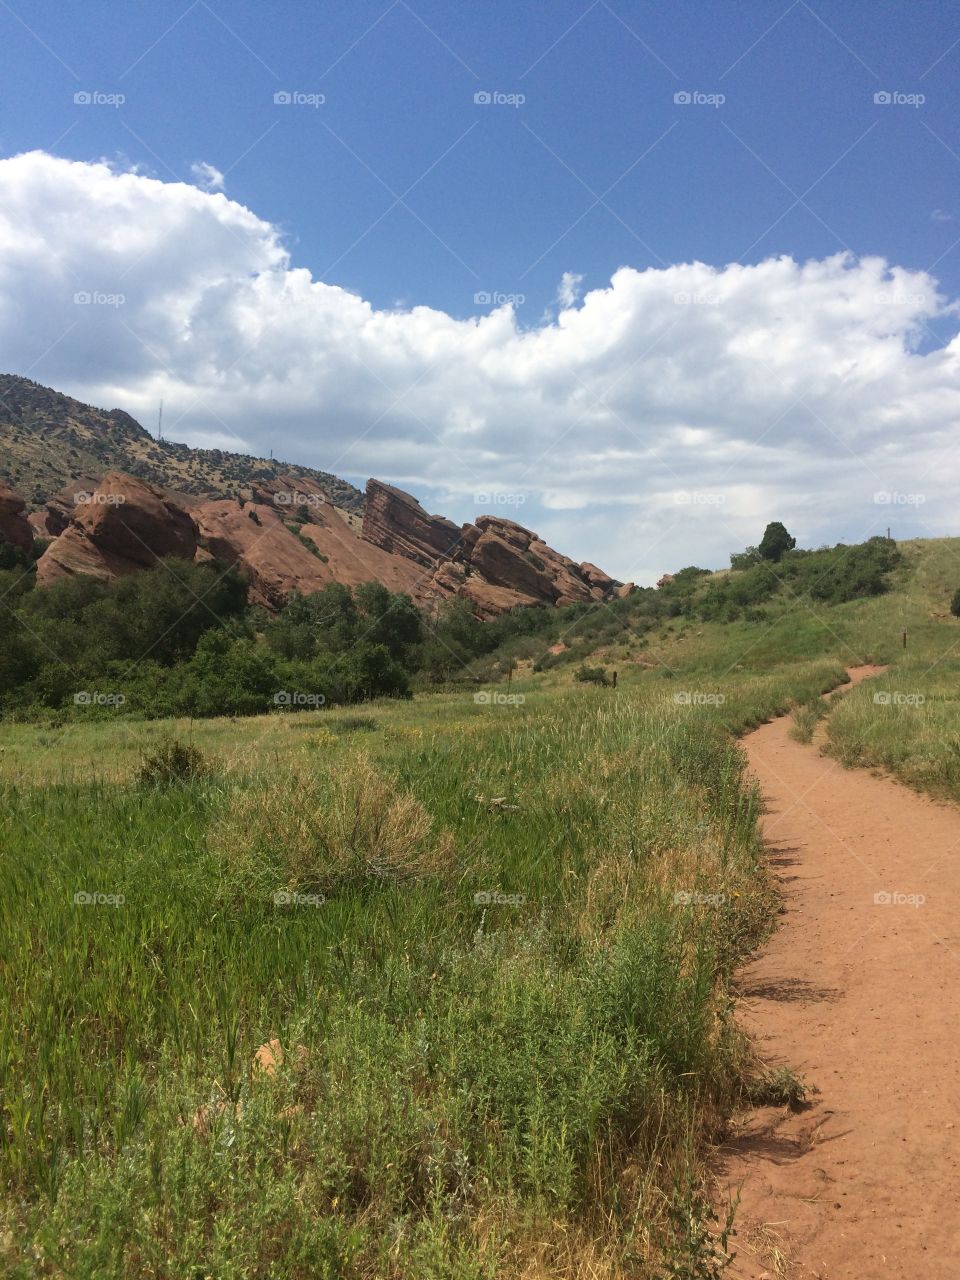 Red Rocks Trail at Red Rocks National Park and Amphitheater.